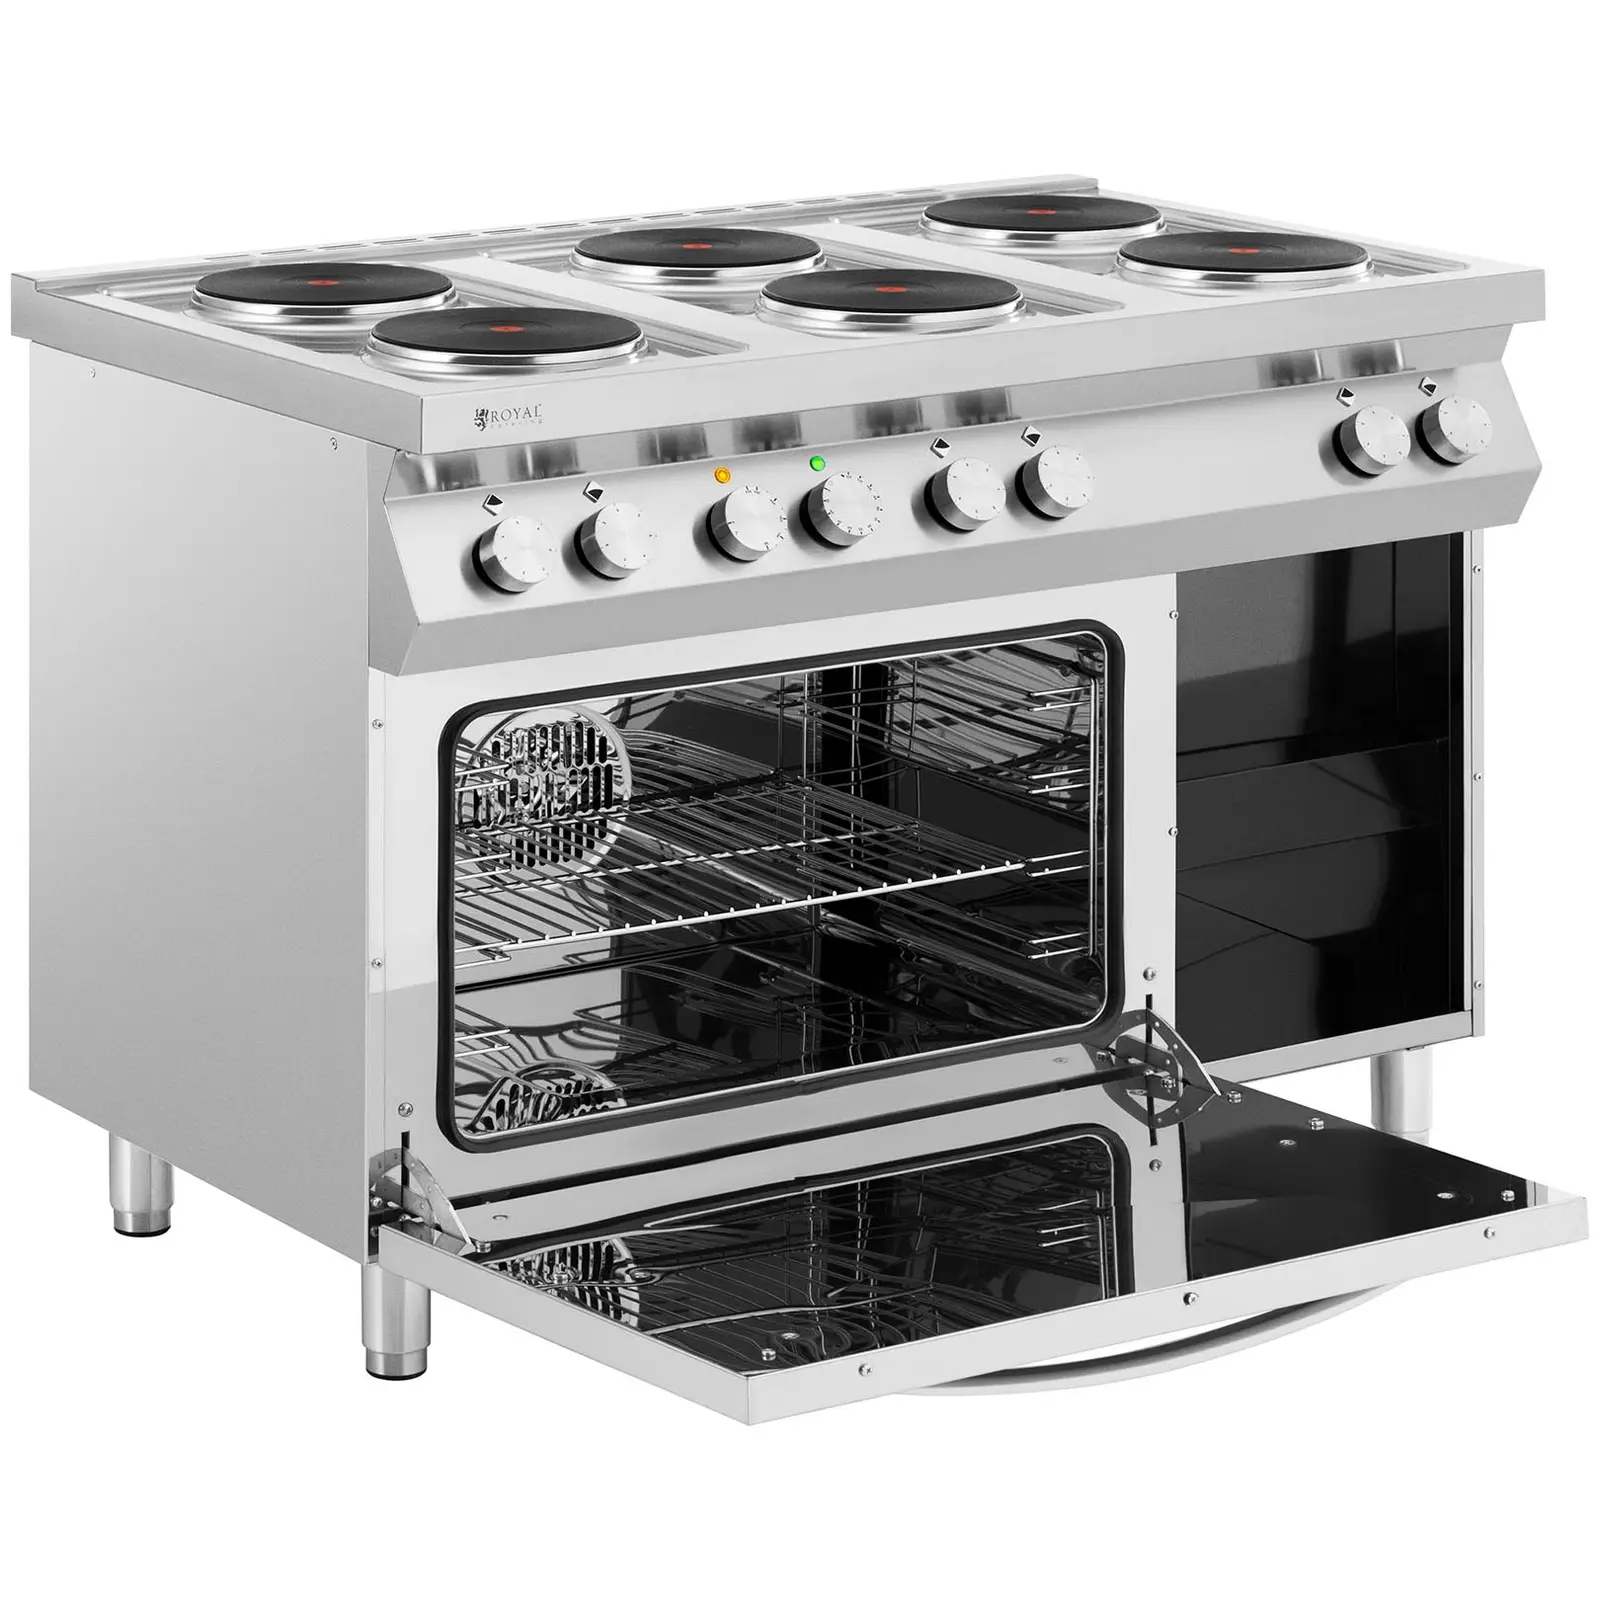 Electric Cooker - 15600 W - 6 plates - with convection oven - base cabinet - Royal Catering